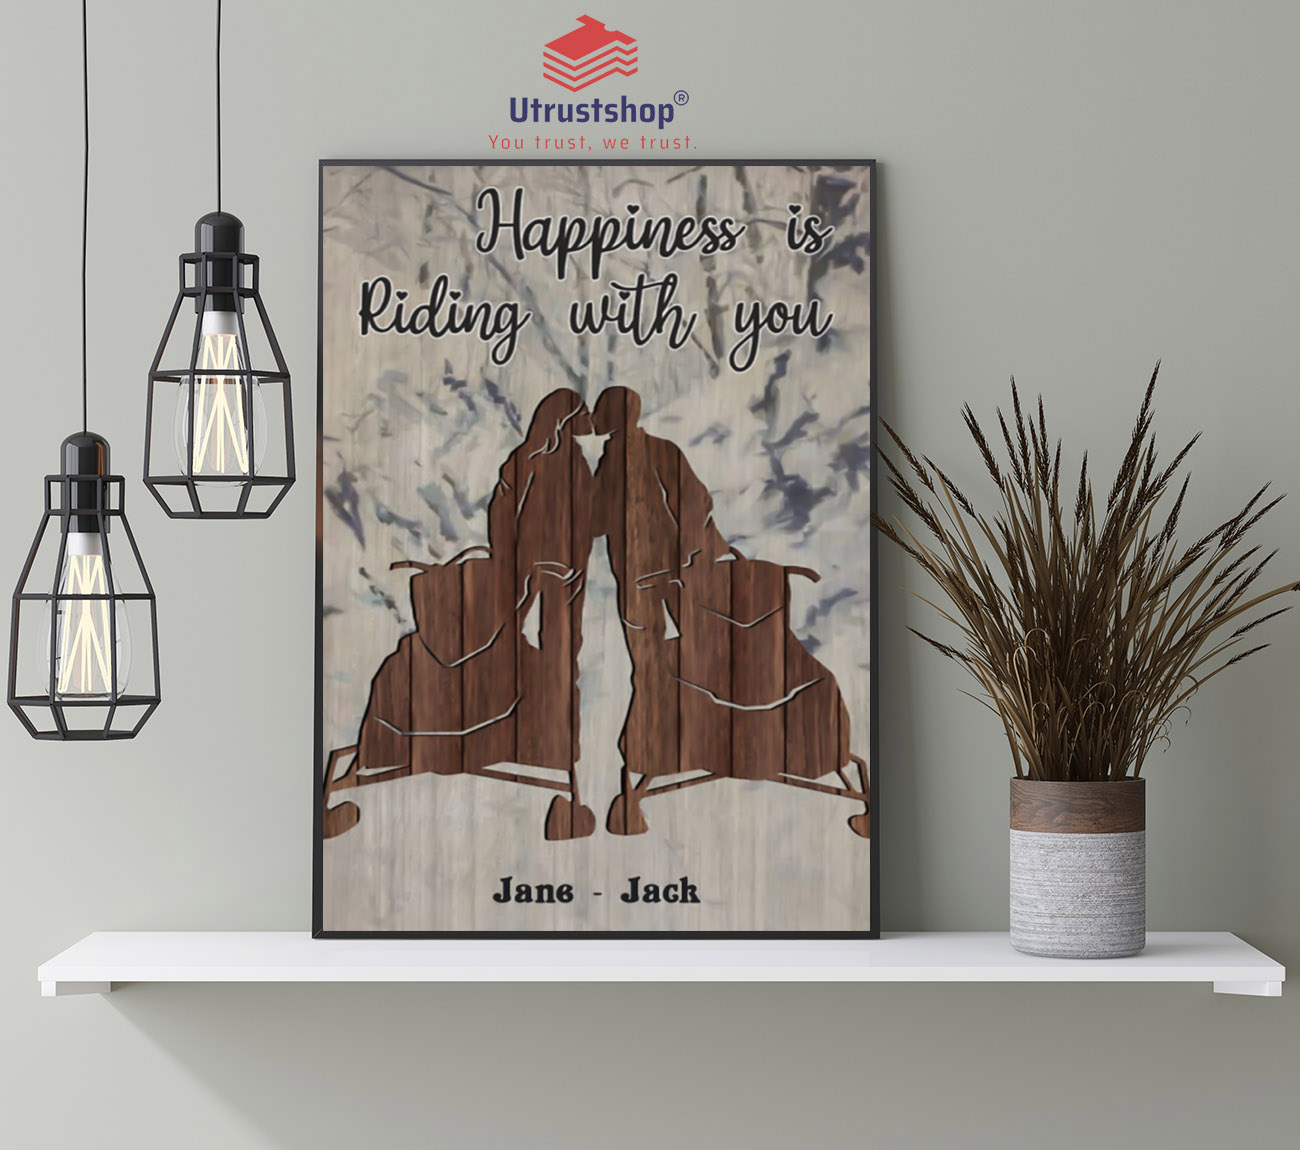 Snowmobile happiness is riding with you poster